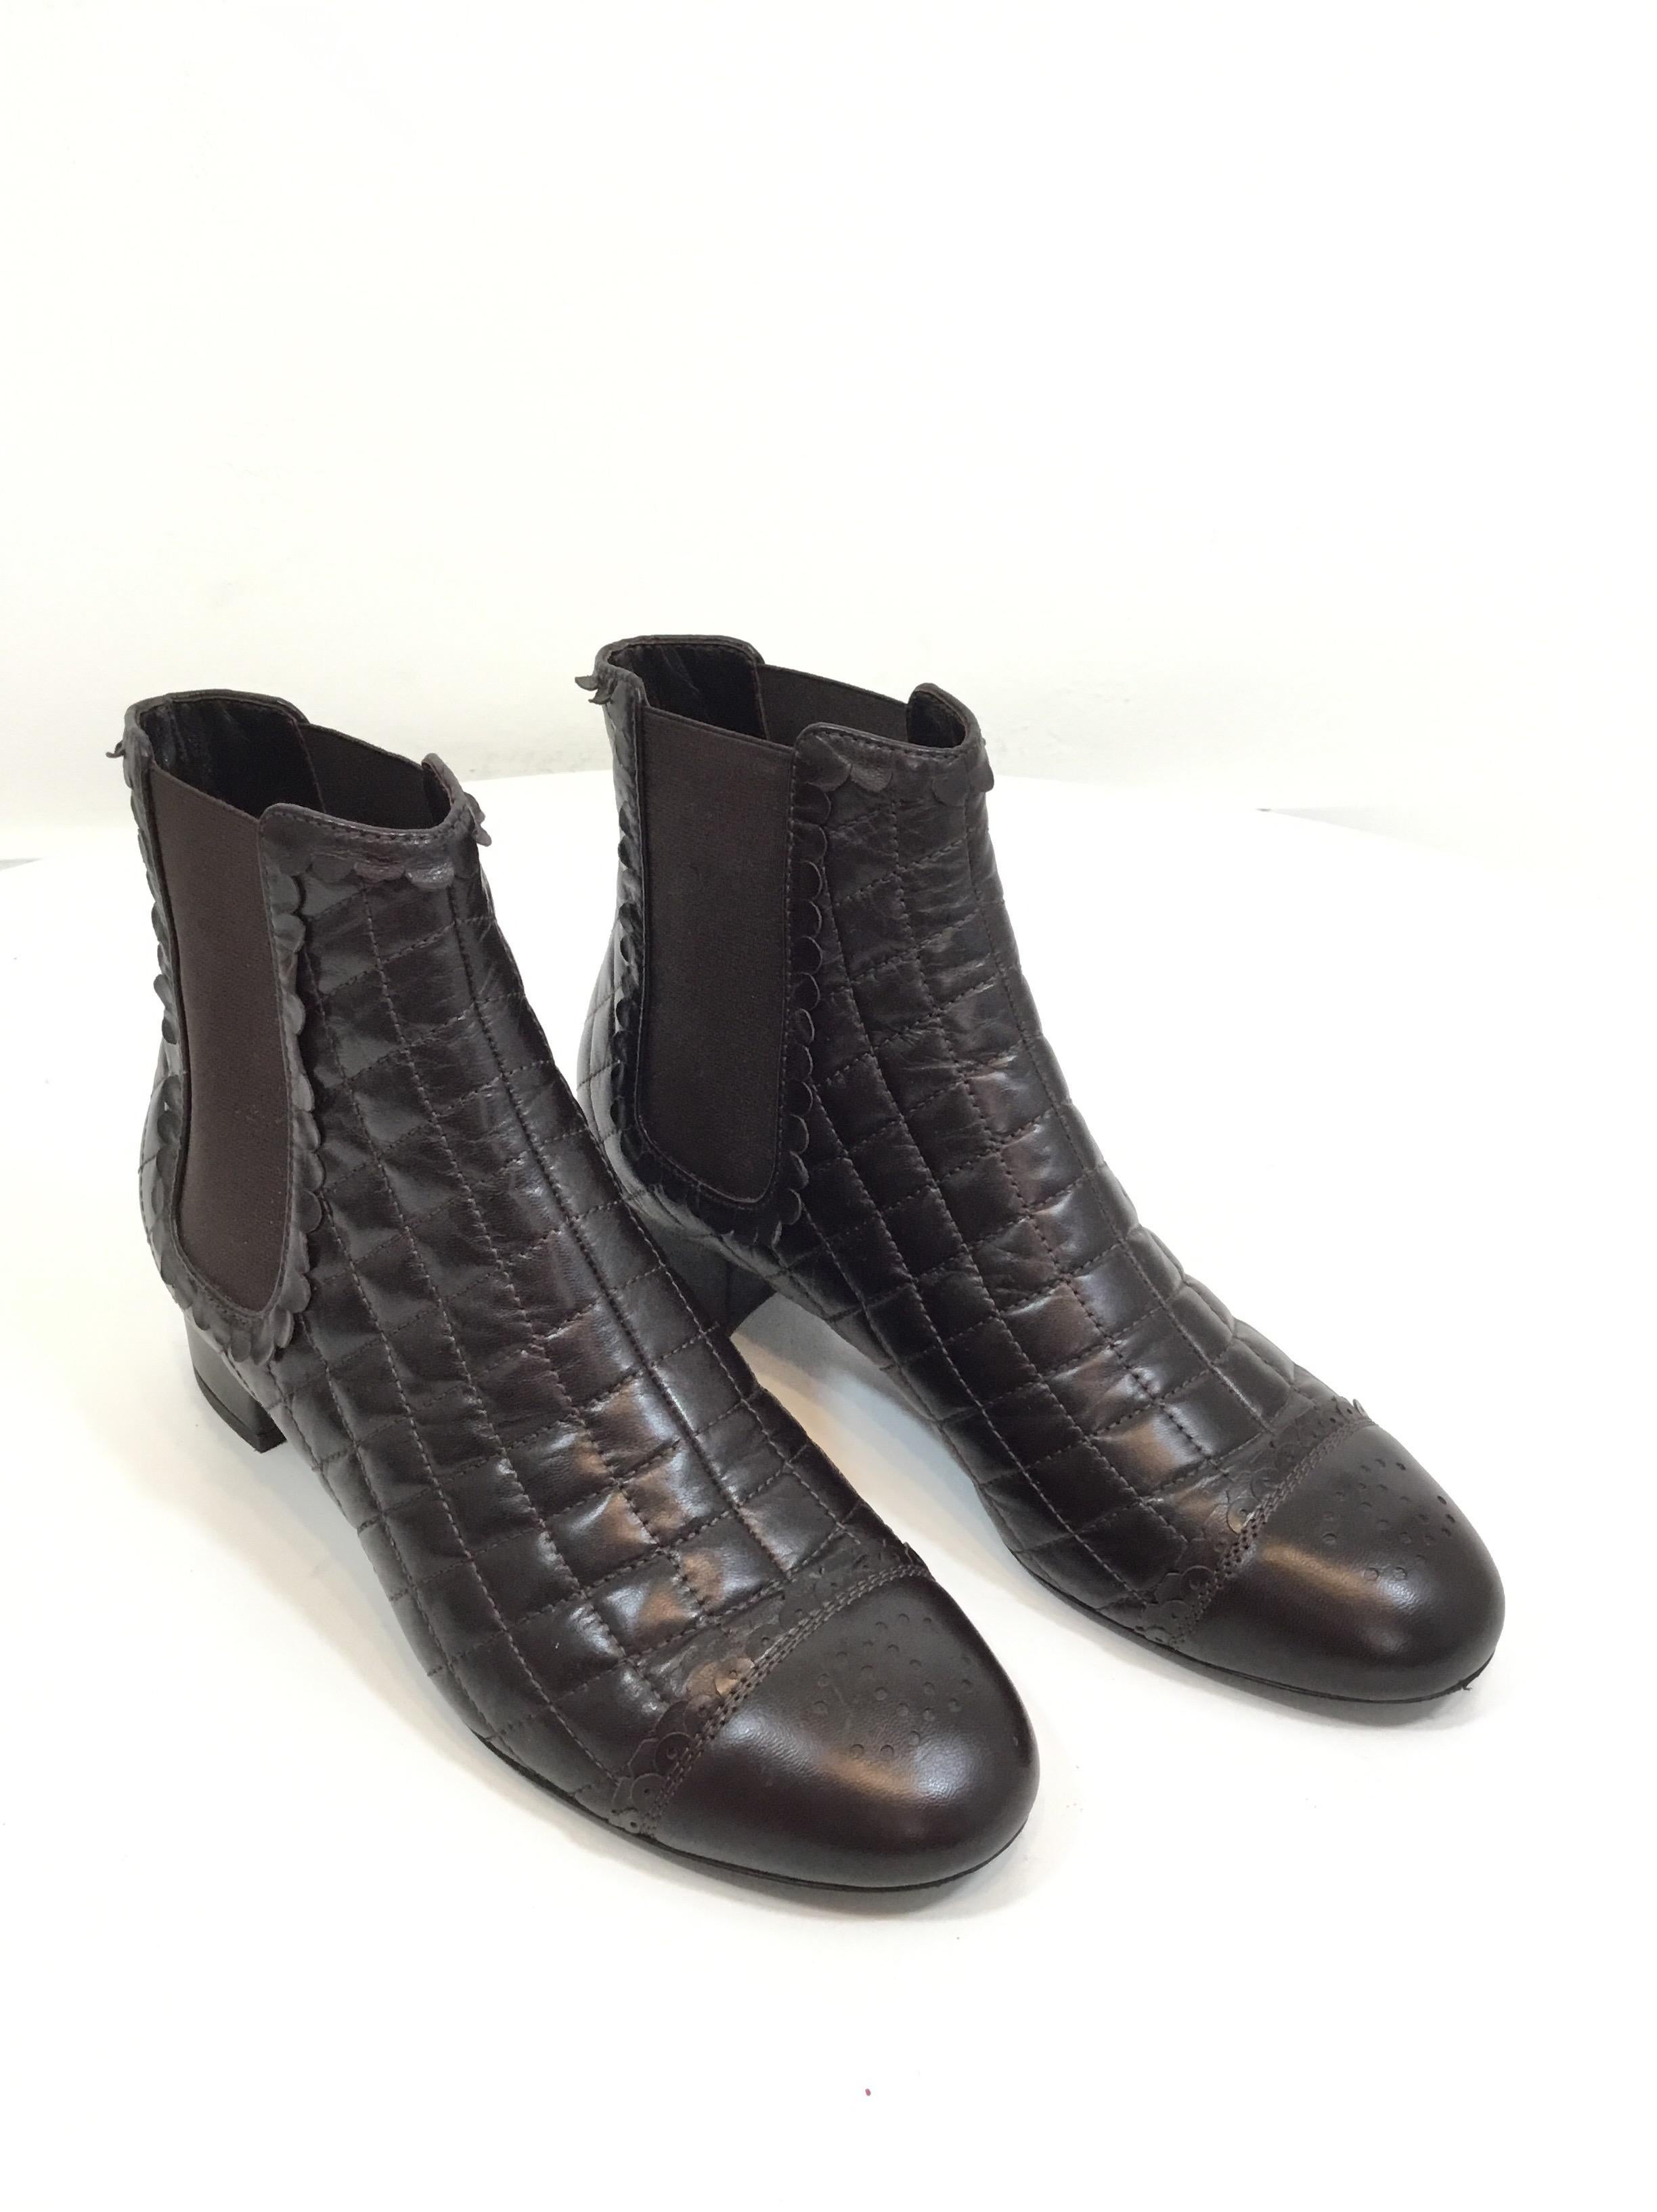 Chanel booties featured in a quilted brown leather with a CC perforated design at the toe and a ruffle-like trim throughout. Booties have stretchy side panels for easy entry. Size 38, made in Italy, leather soles. Shaft 5”, heel 1.5”. Normal wears